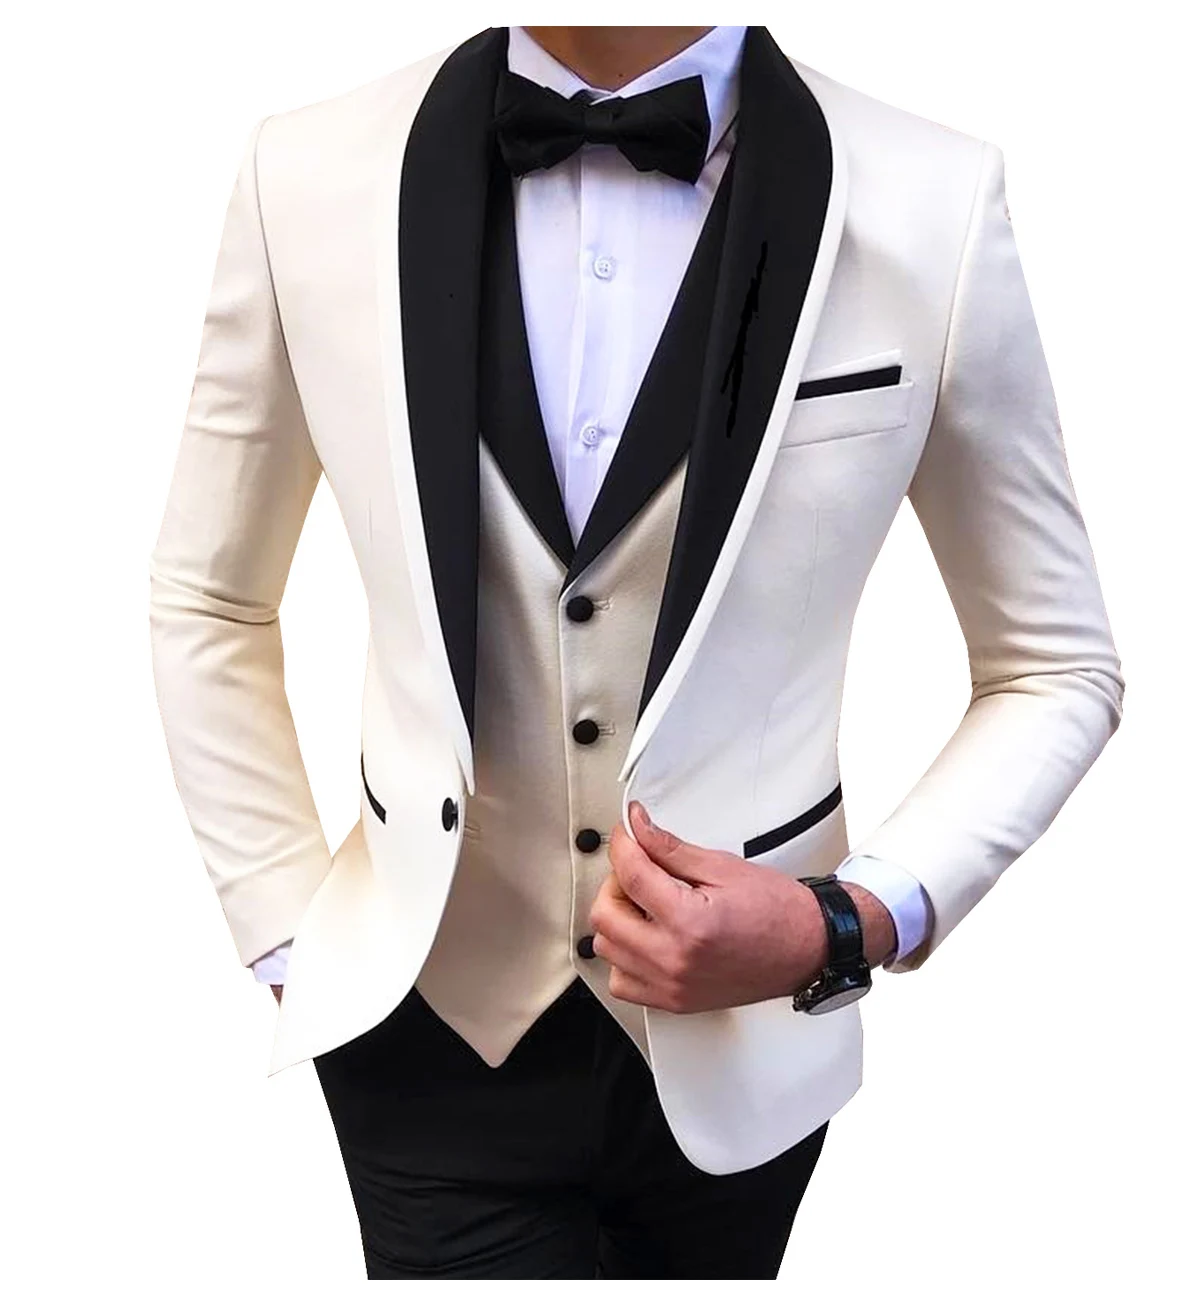 White Men Suits For Wedding Shawl Lapel Casual Suits Groom Tuxedos Costume homme Terno Masculino 3Pieces(Blazer+Vest+Pants)